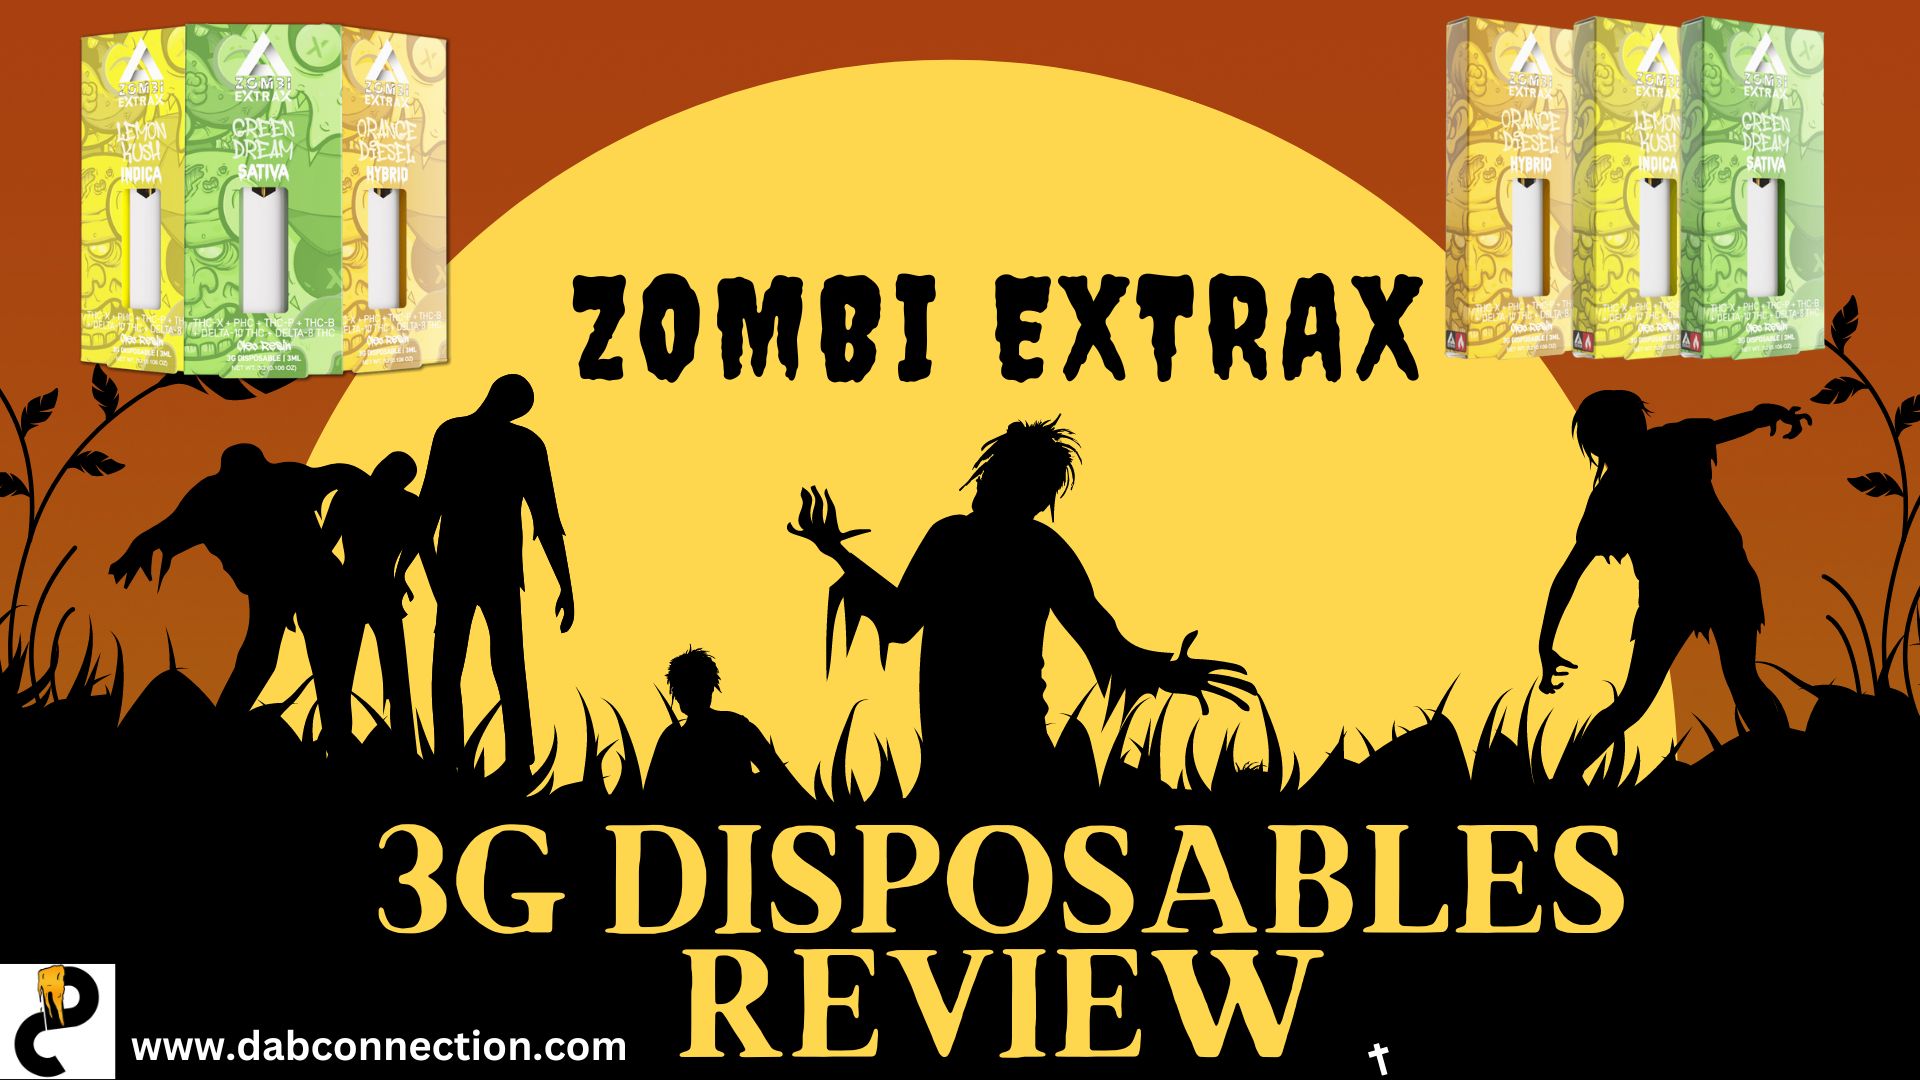 Zombi Extrax 3G Disposables Review - A Memorable Experience